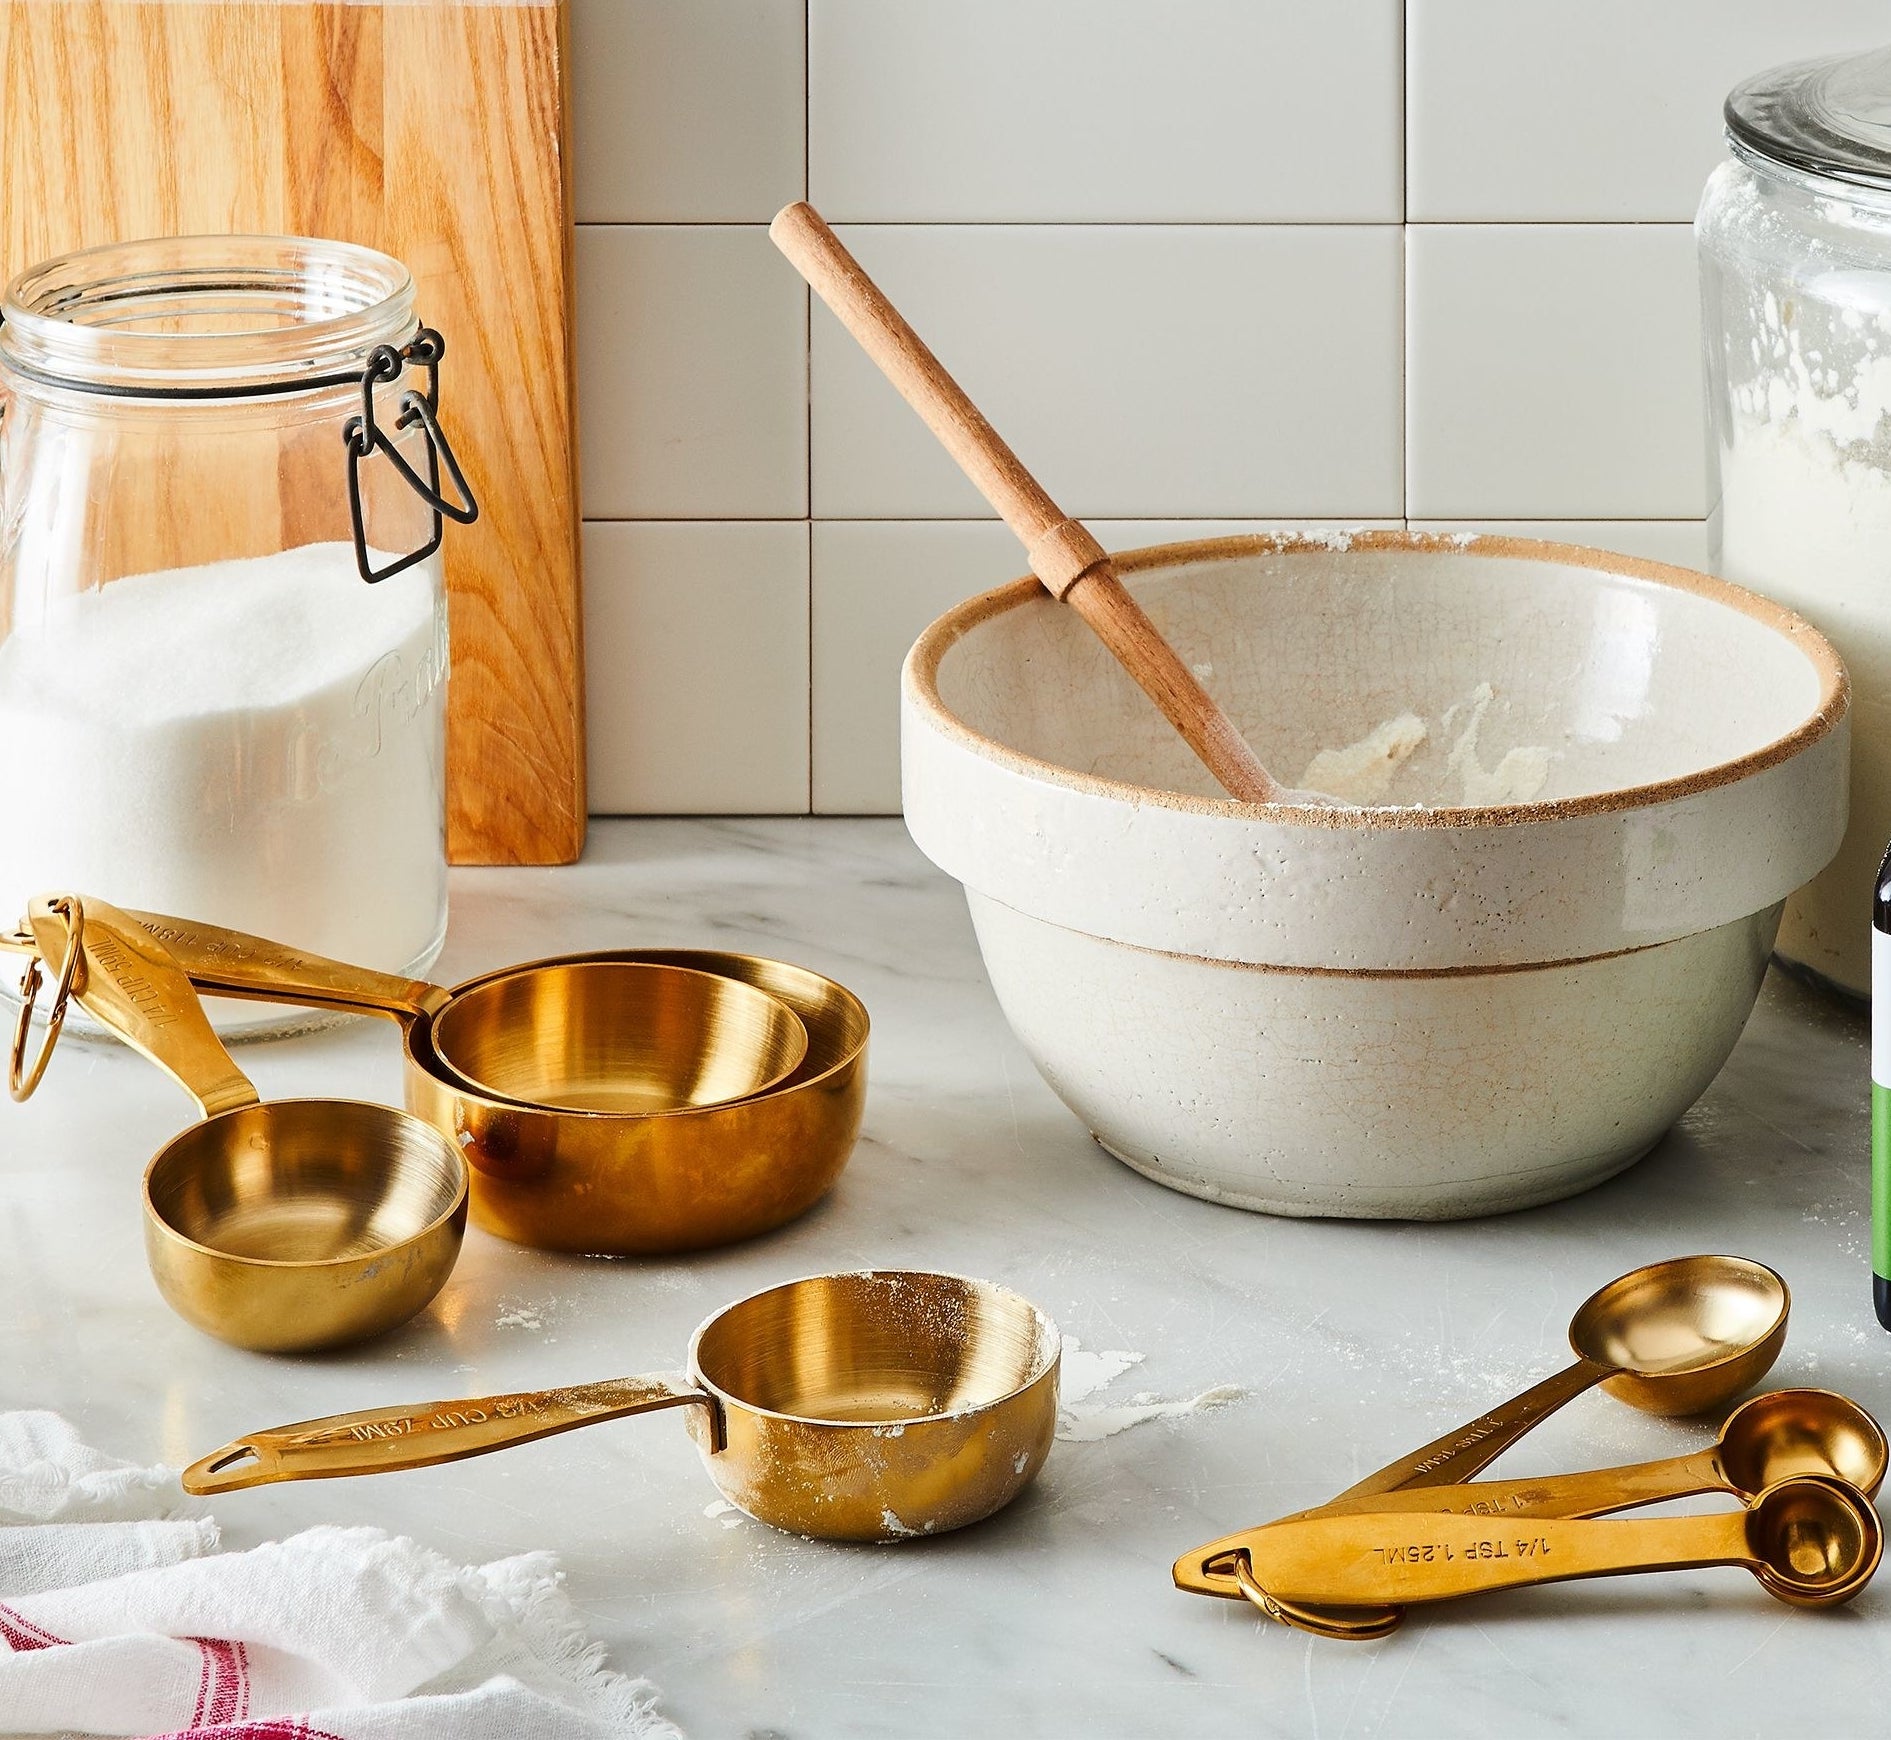 the gold measuring cups and spoons on a counter next to a mixing bowl and baking ingredients